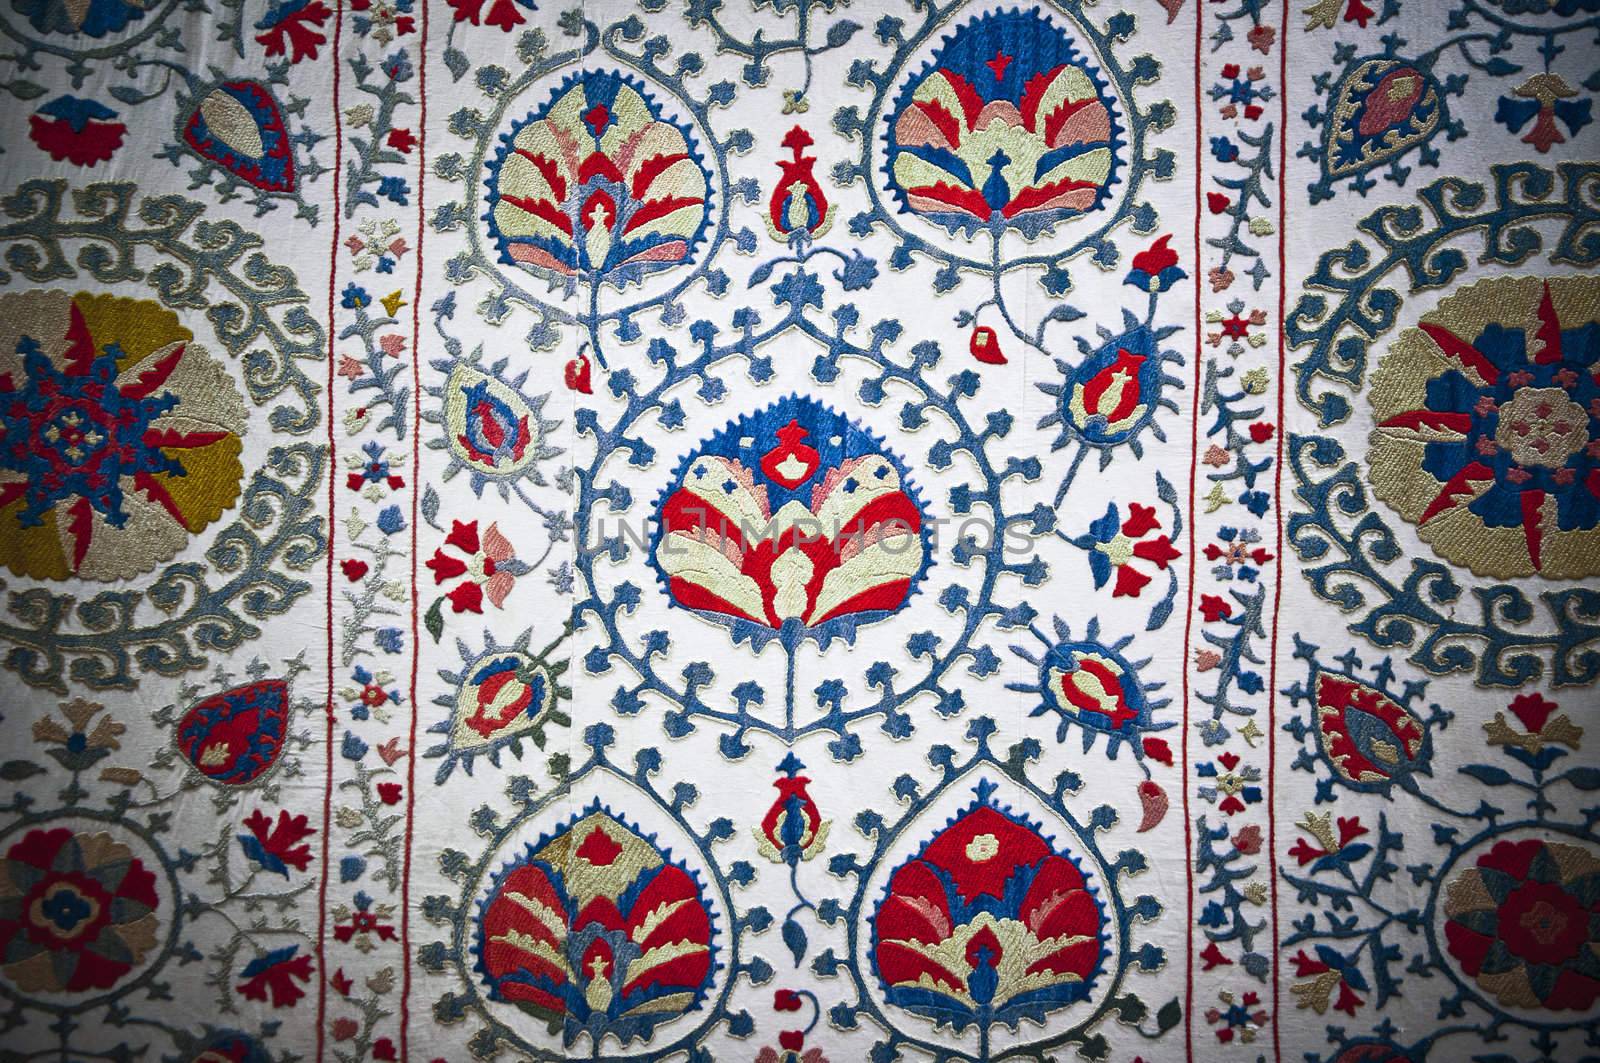 Detail from Turkish fabric with traditional floral designs